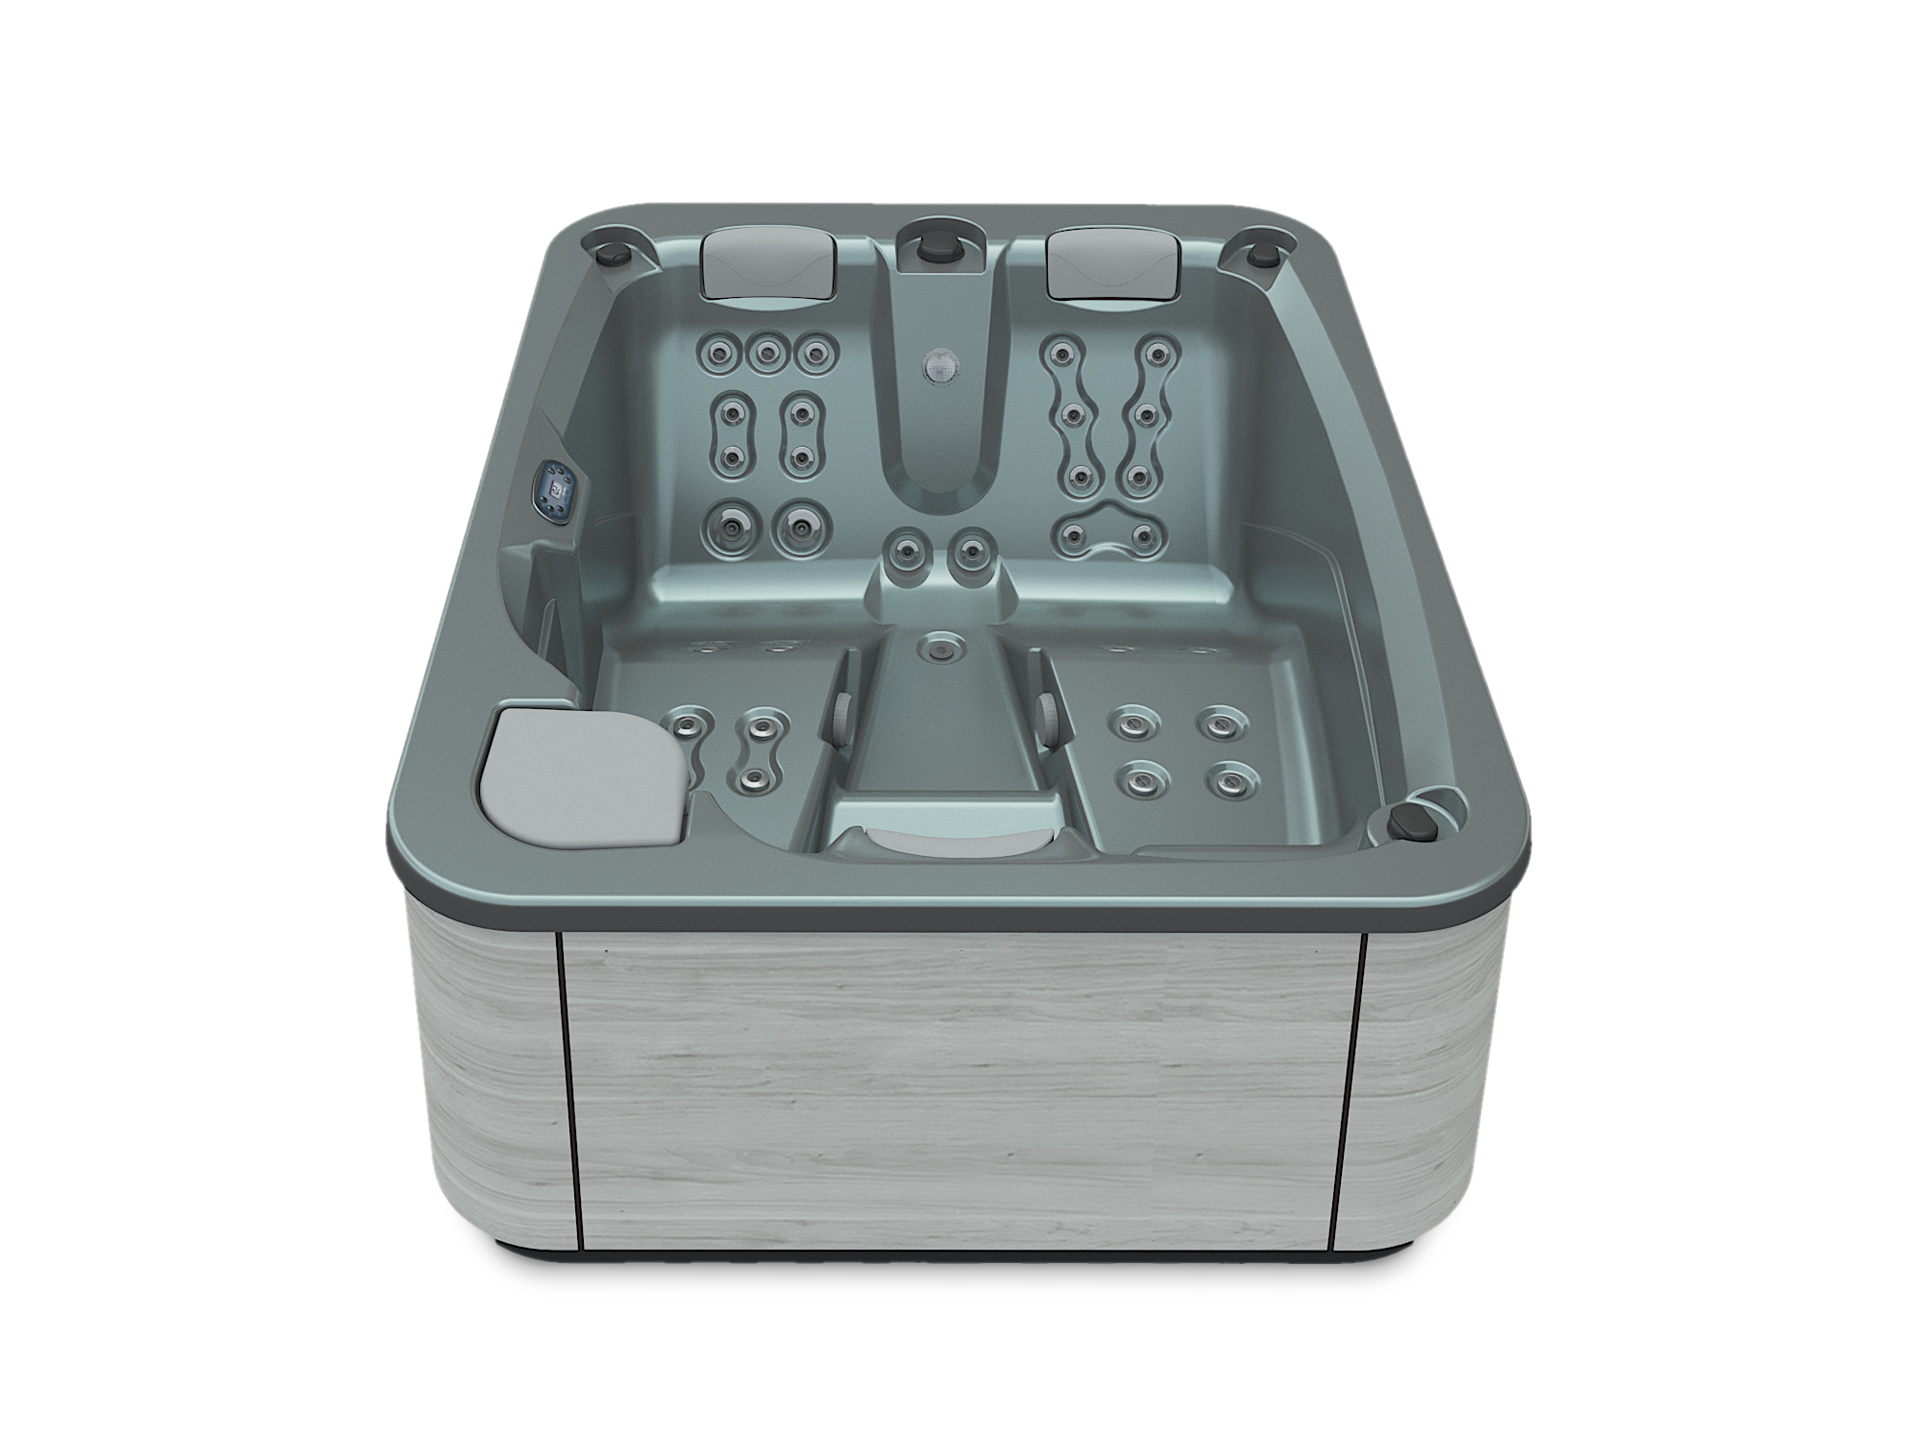 The Touch compact hot tub, a 4-person jacuzzi